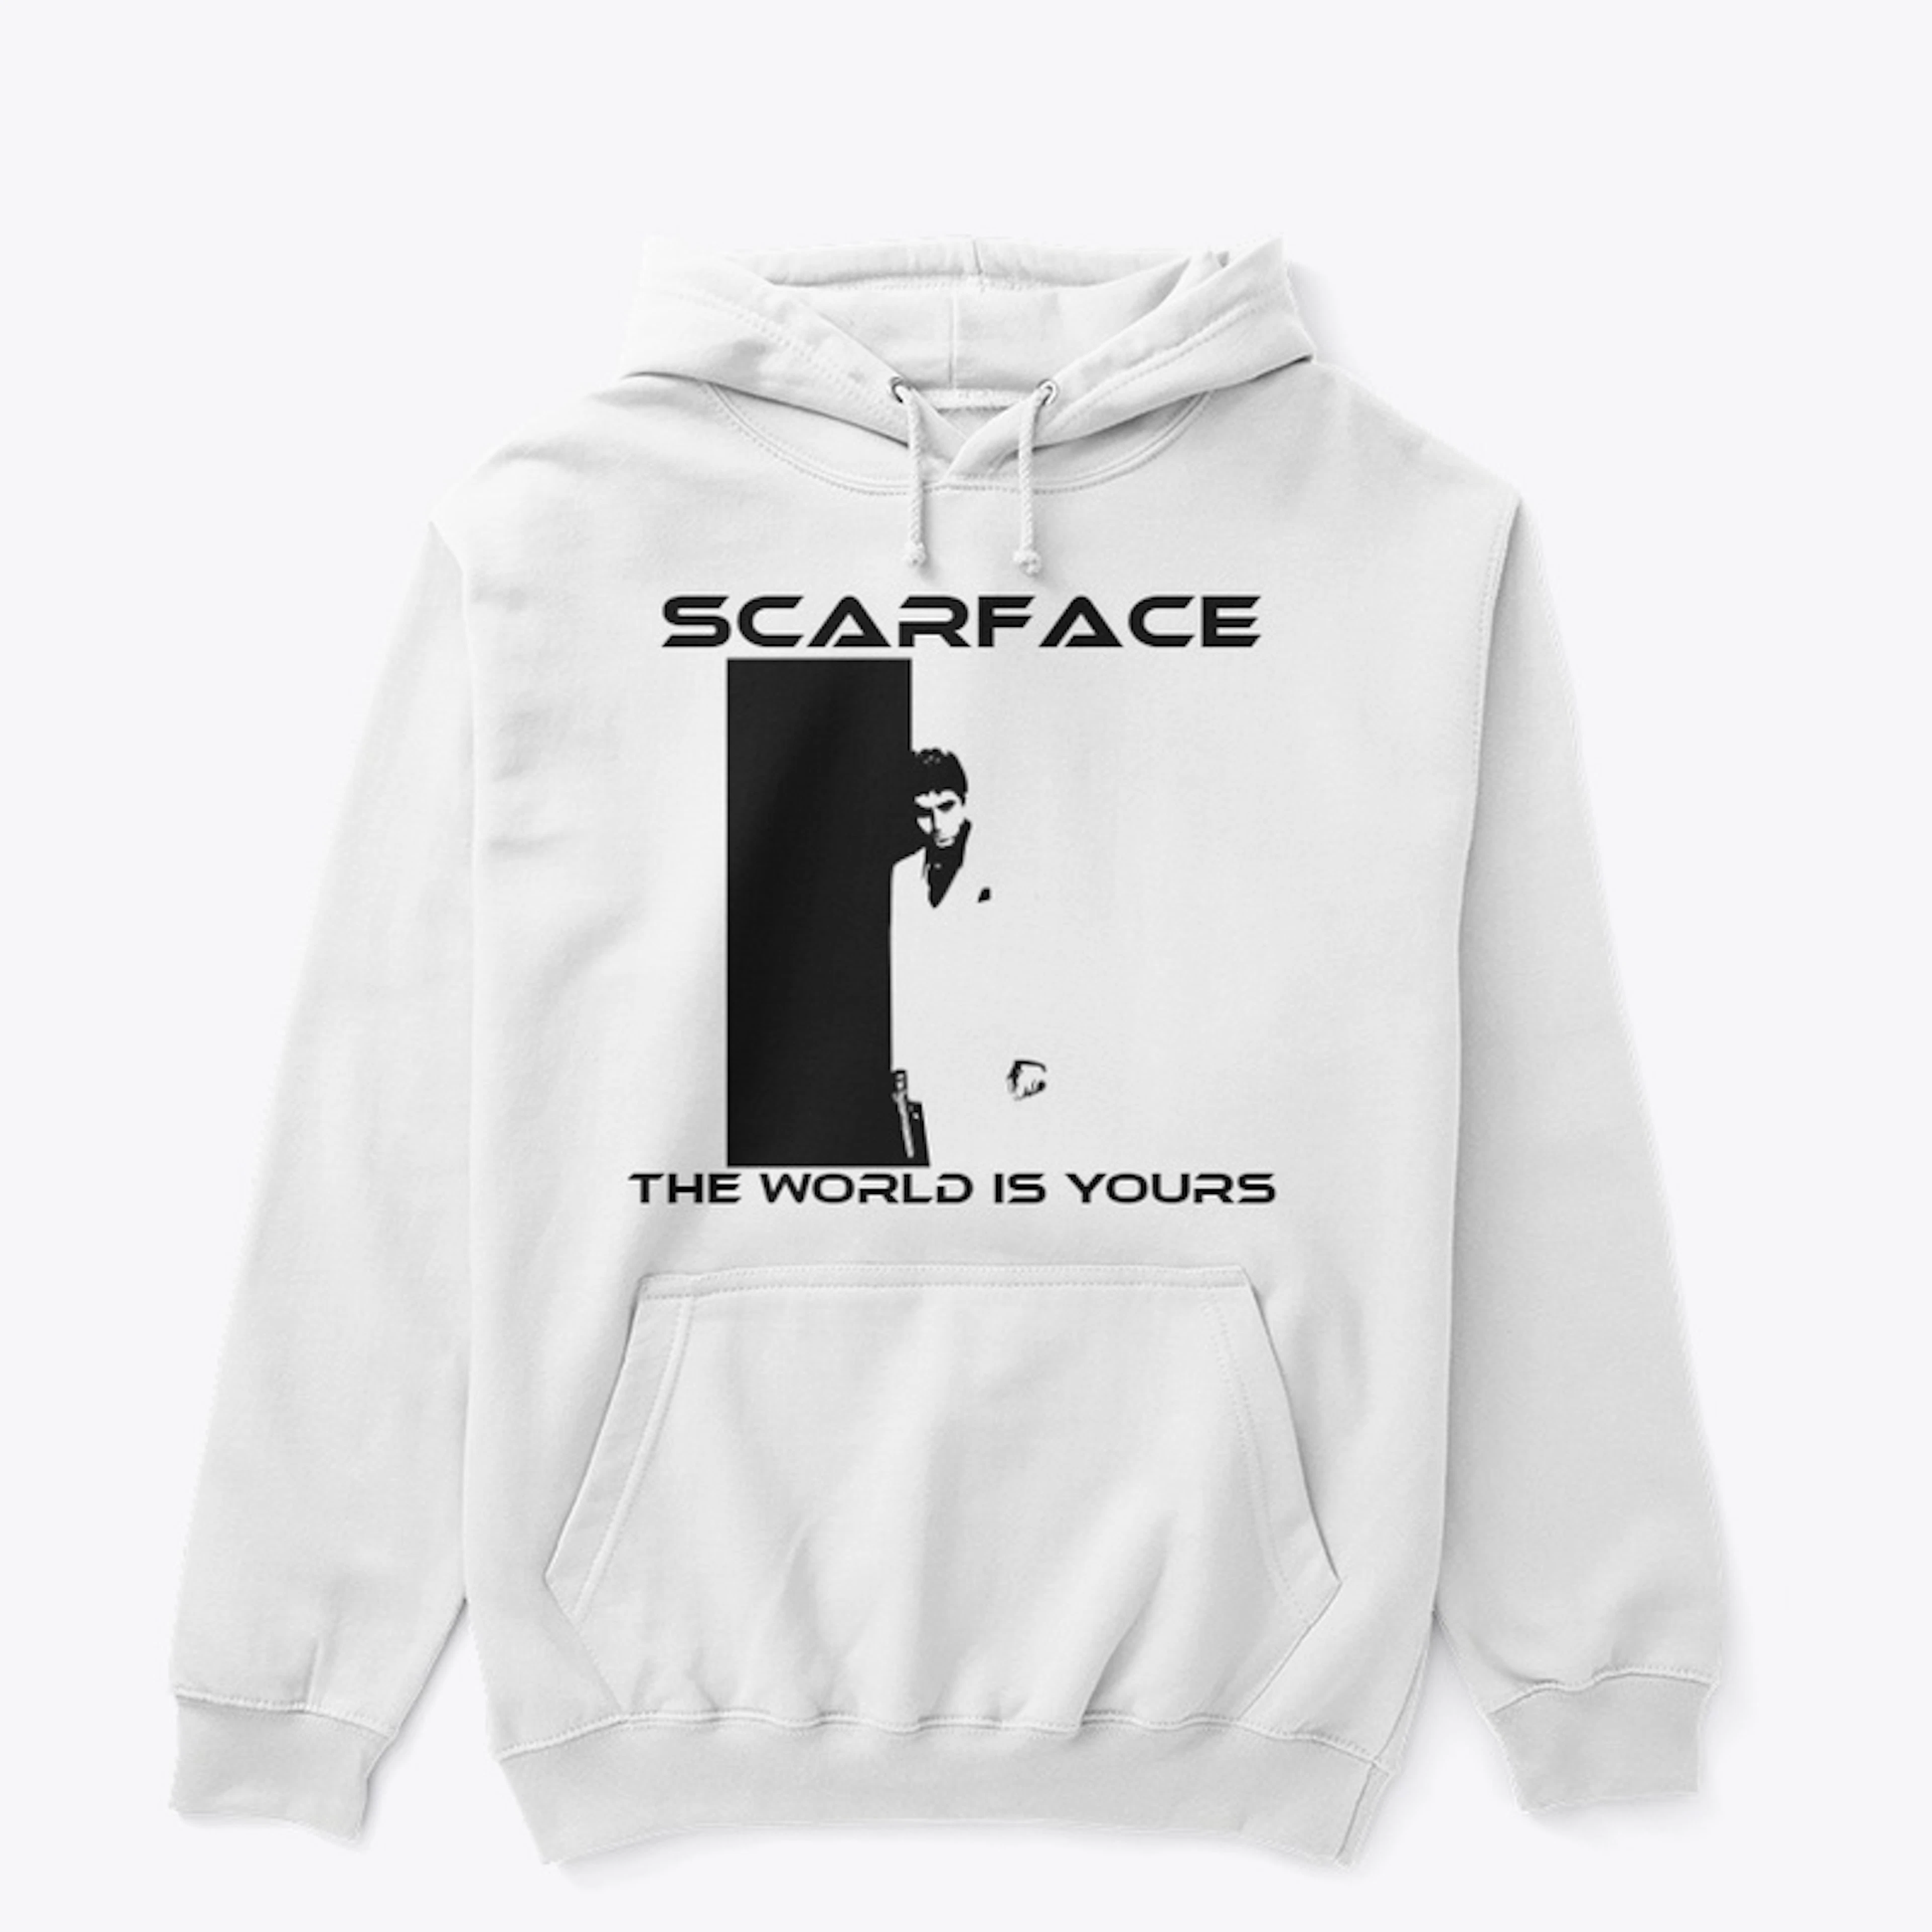 Scarface "the world is yours"